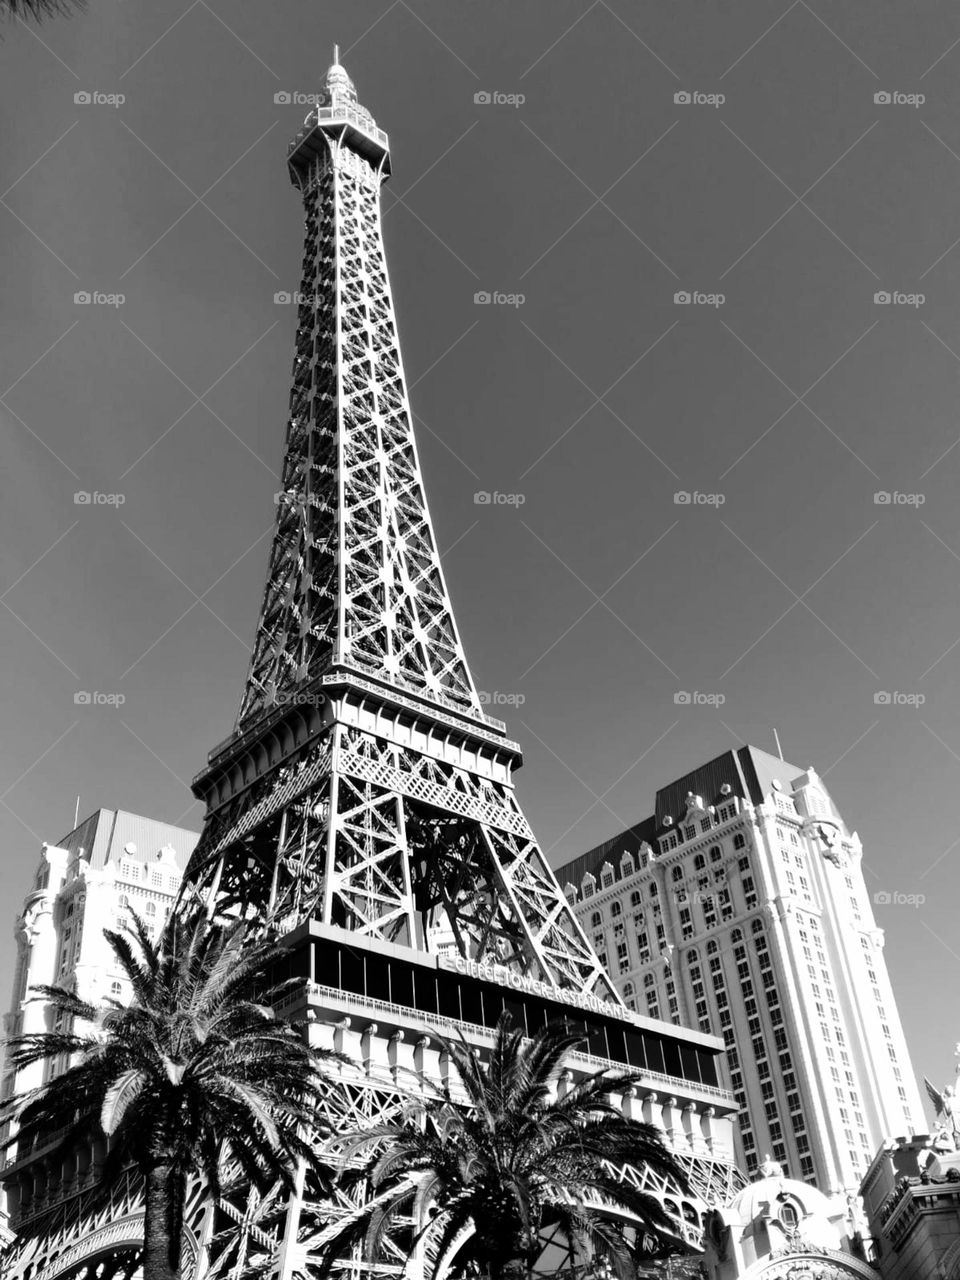 Eiffel Tower replica Las Vegas, NV rising from the surrounding hotels.